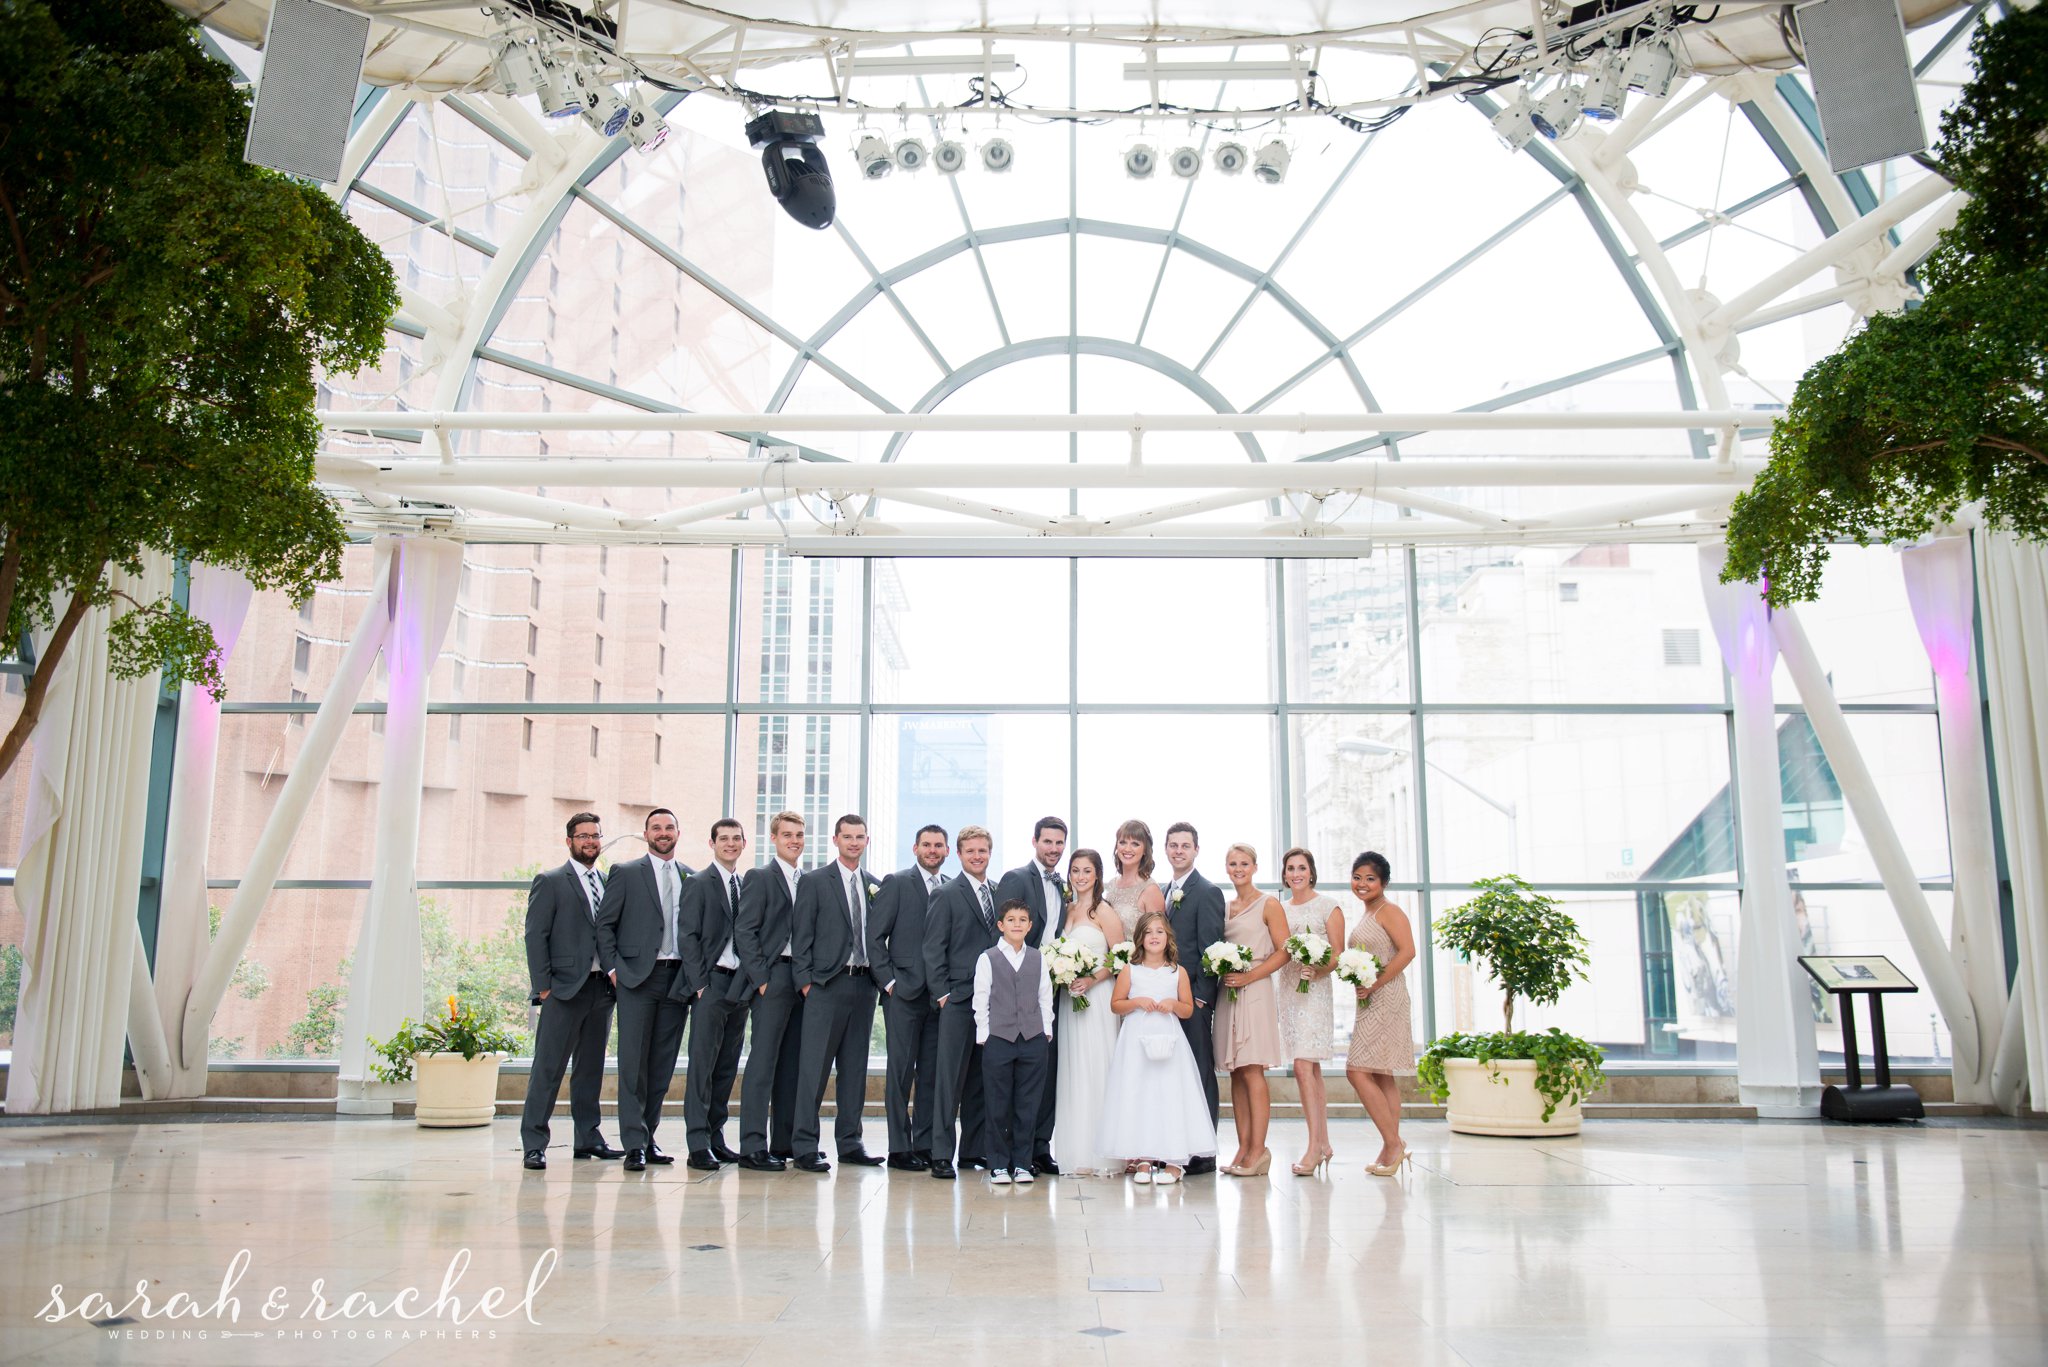 indianapolis arts garden wedding large bridal party great suits and gold dresses